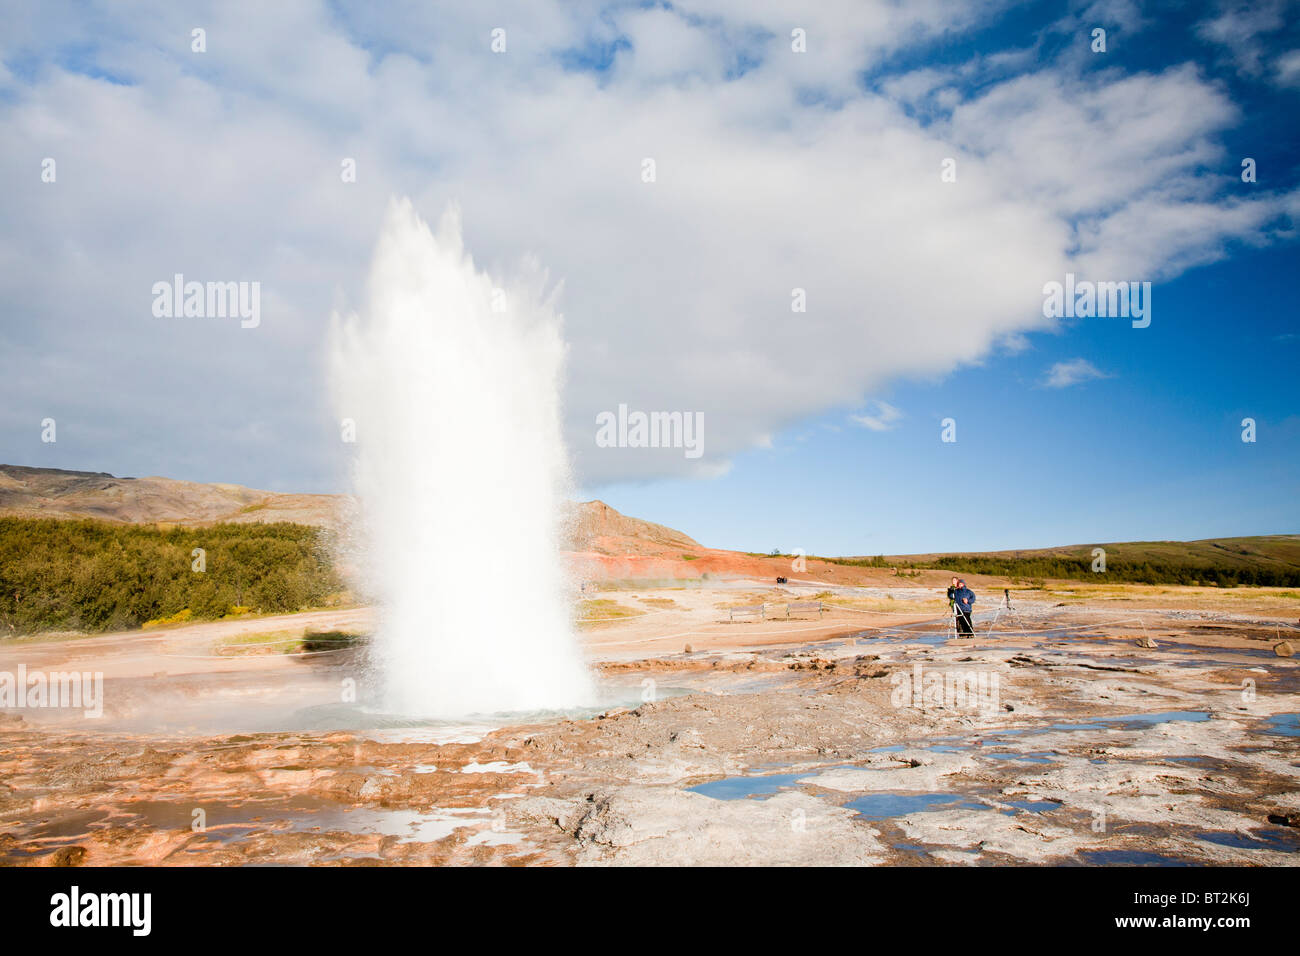 A geysir eruptiong at Geysir in Iceland, the place after which all the worlds geysirs are named. Stock Photo